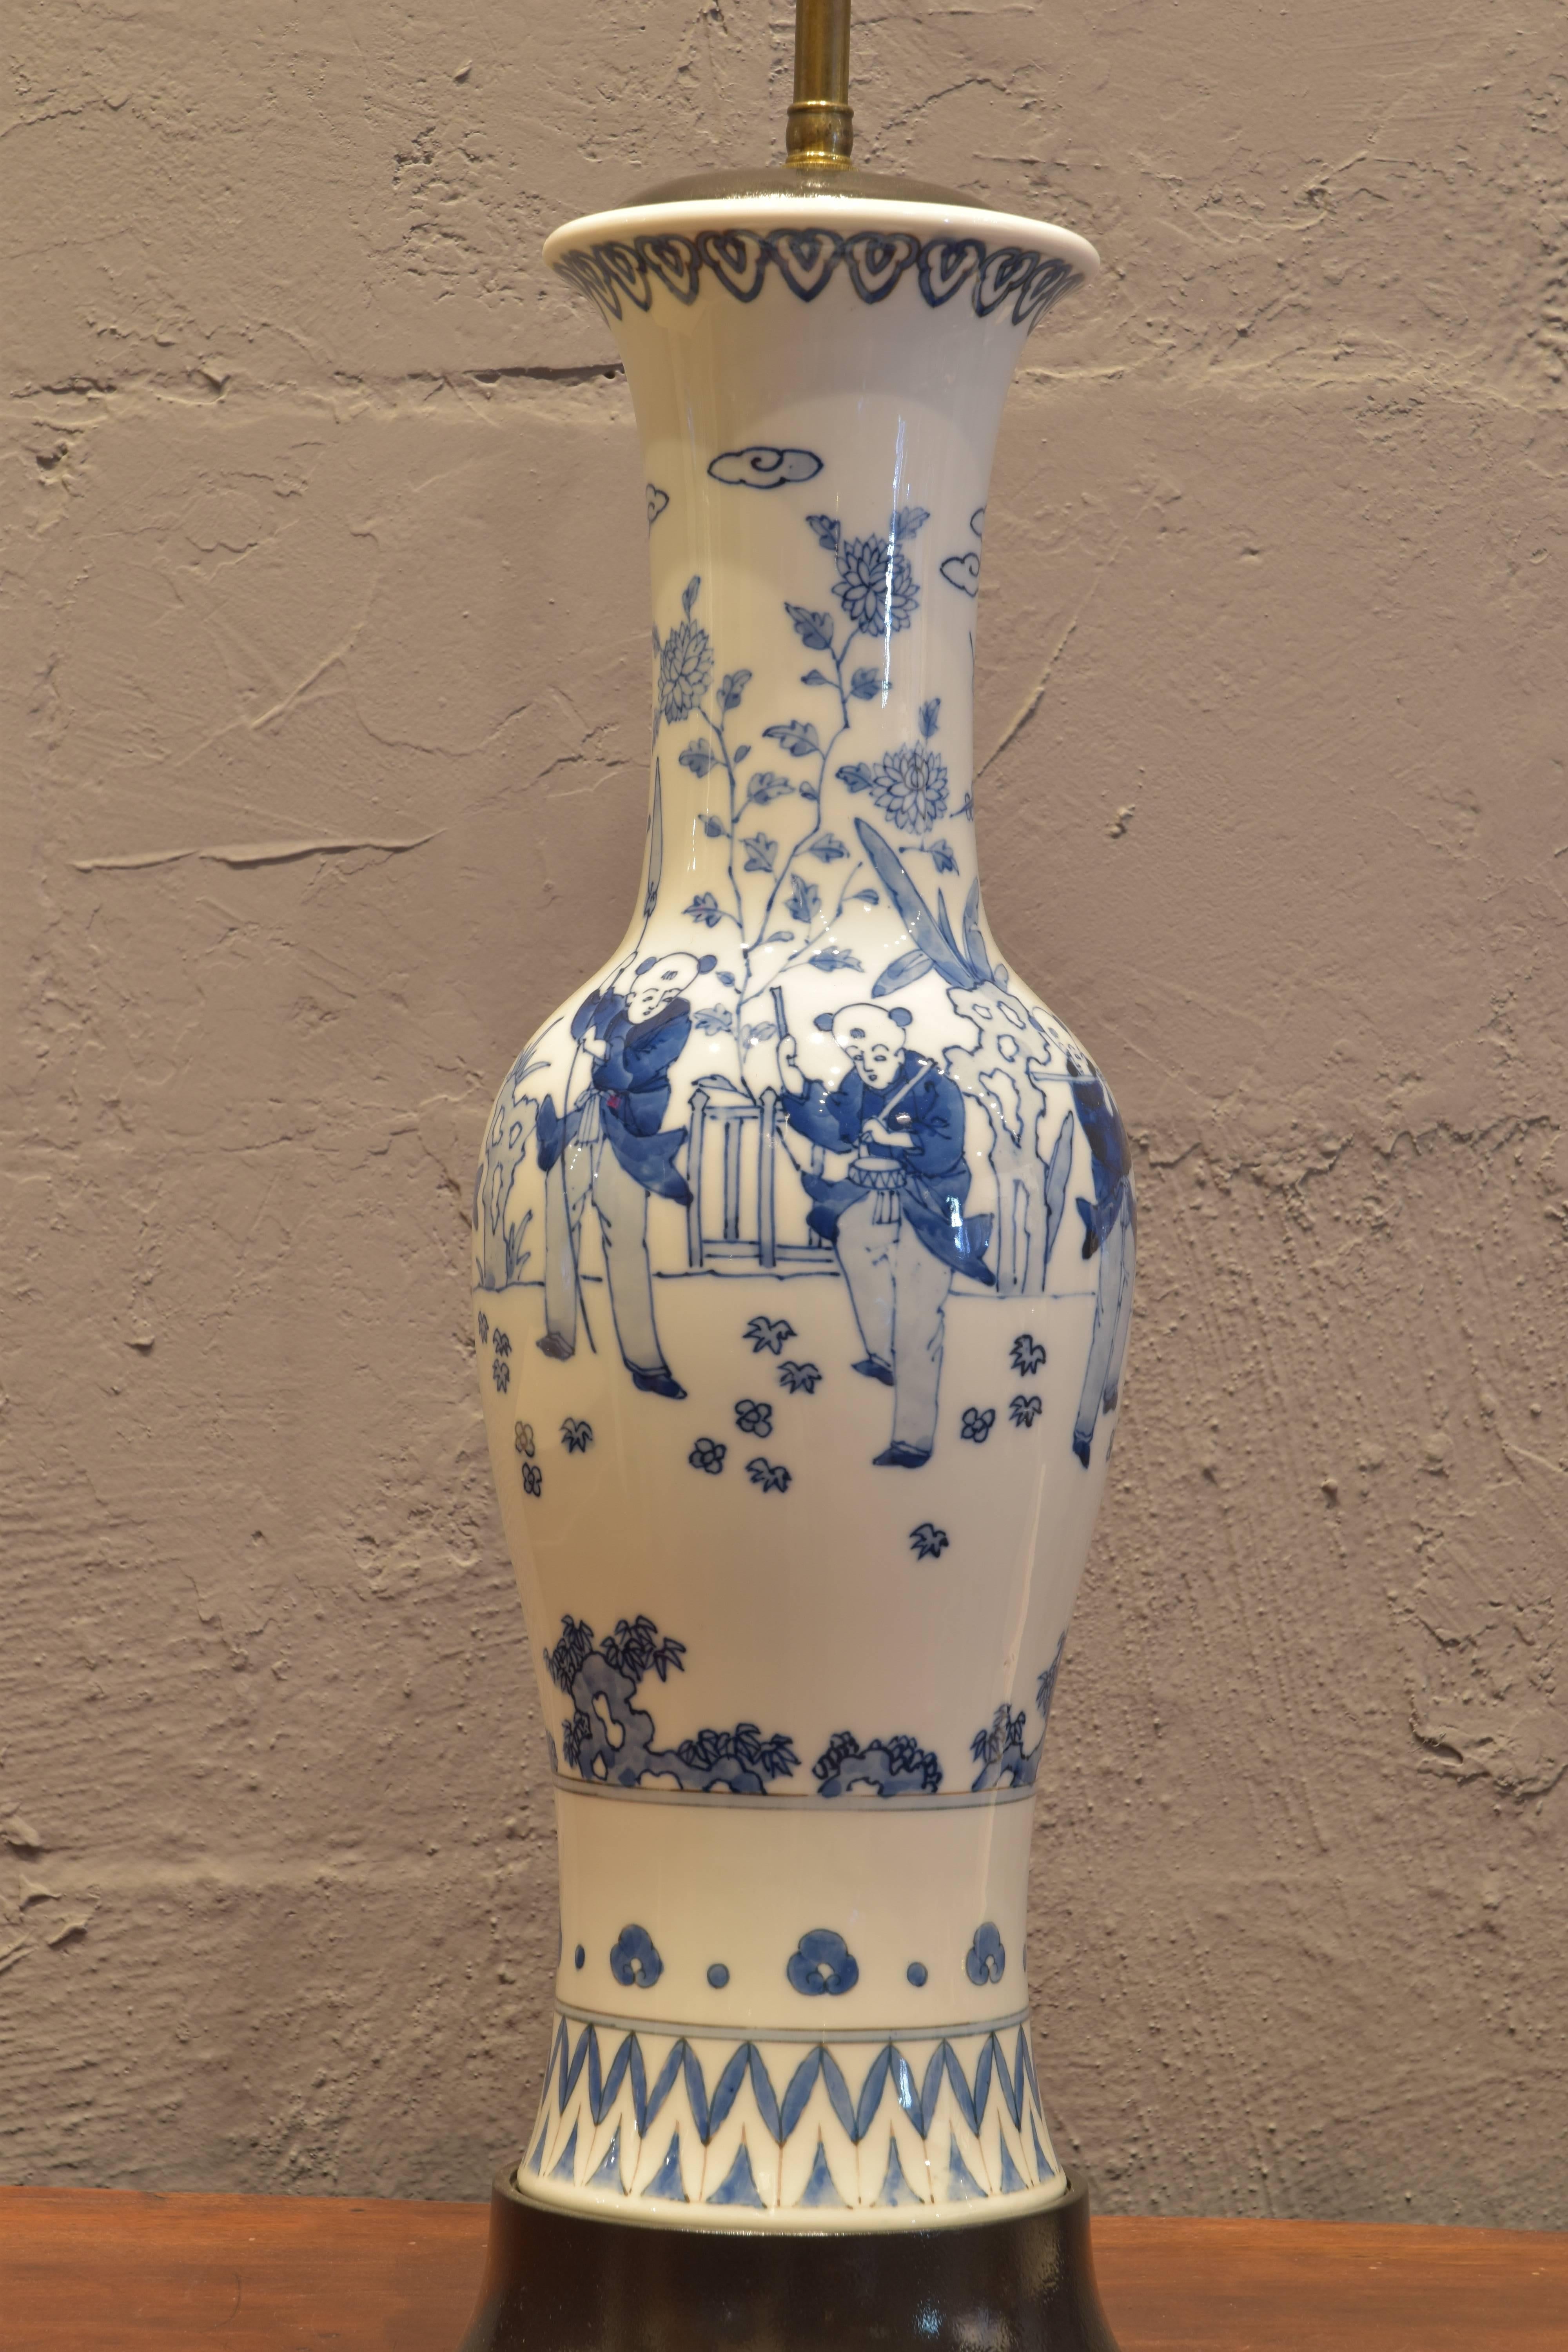 Tall, slender Chinese porcelain lamp with hand-painted figural scenes on original painted black wooden base.